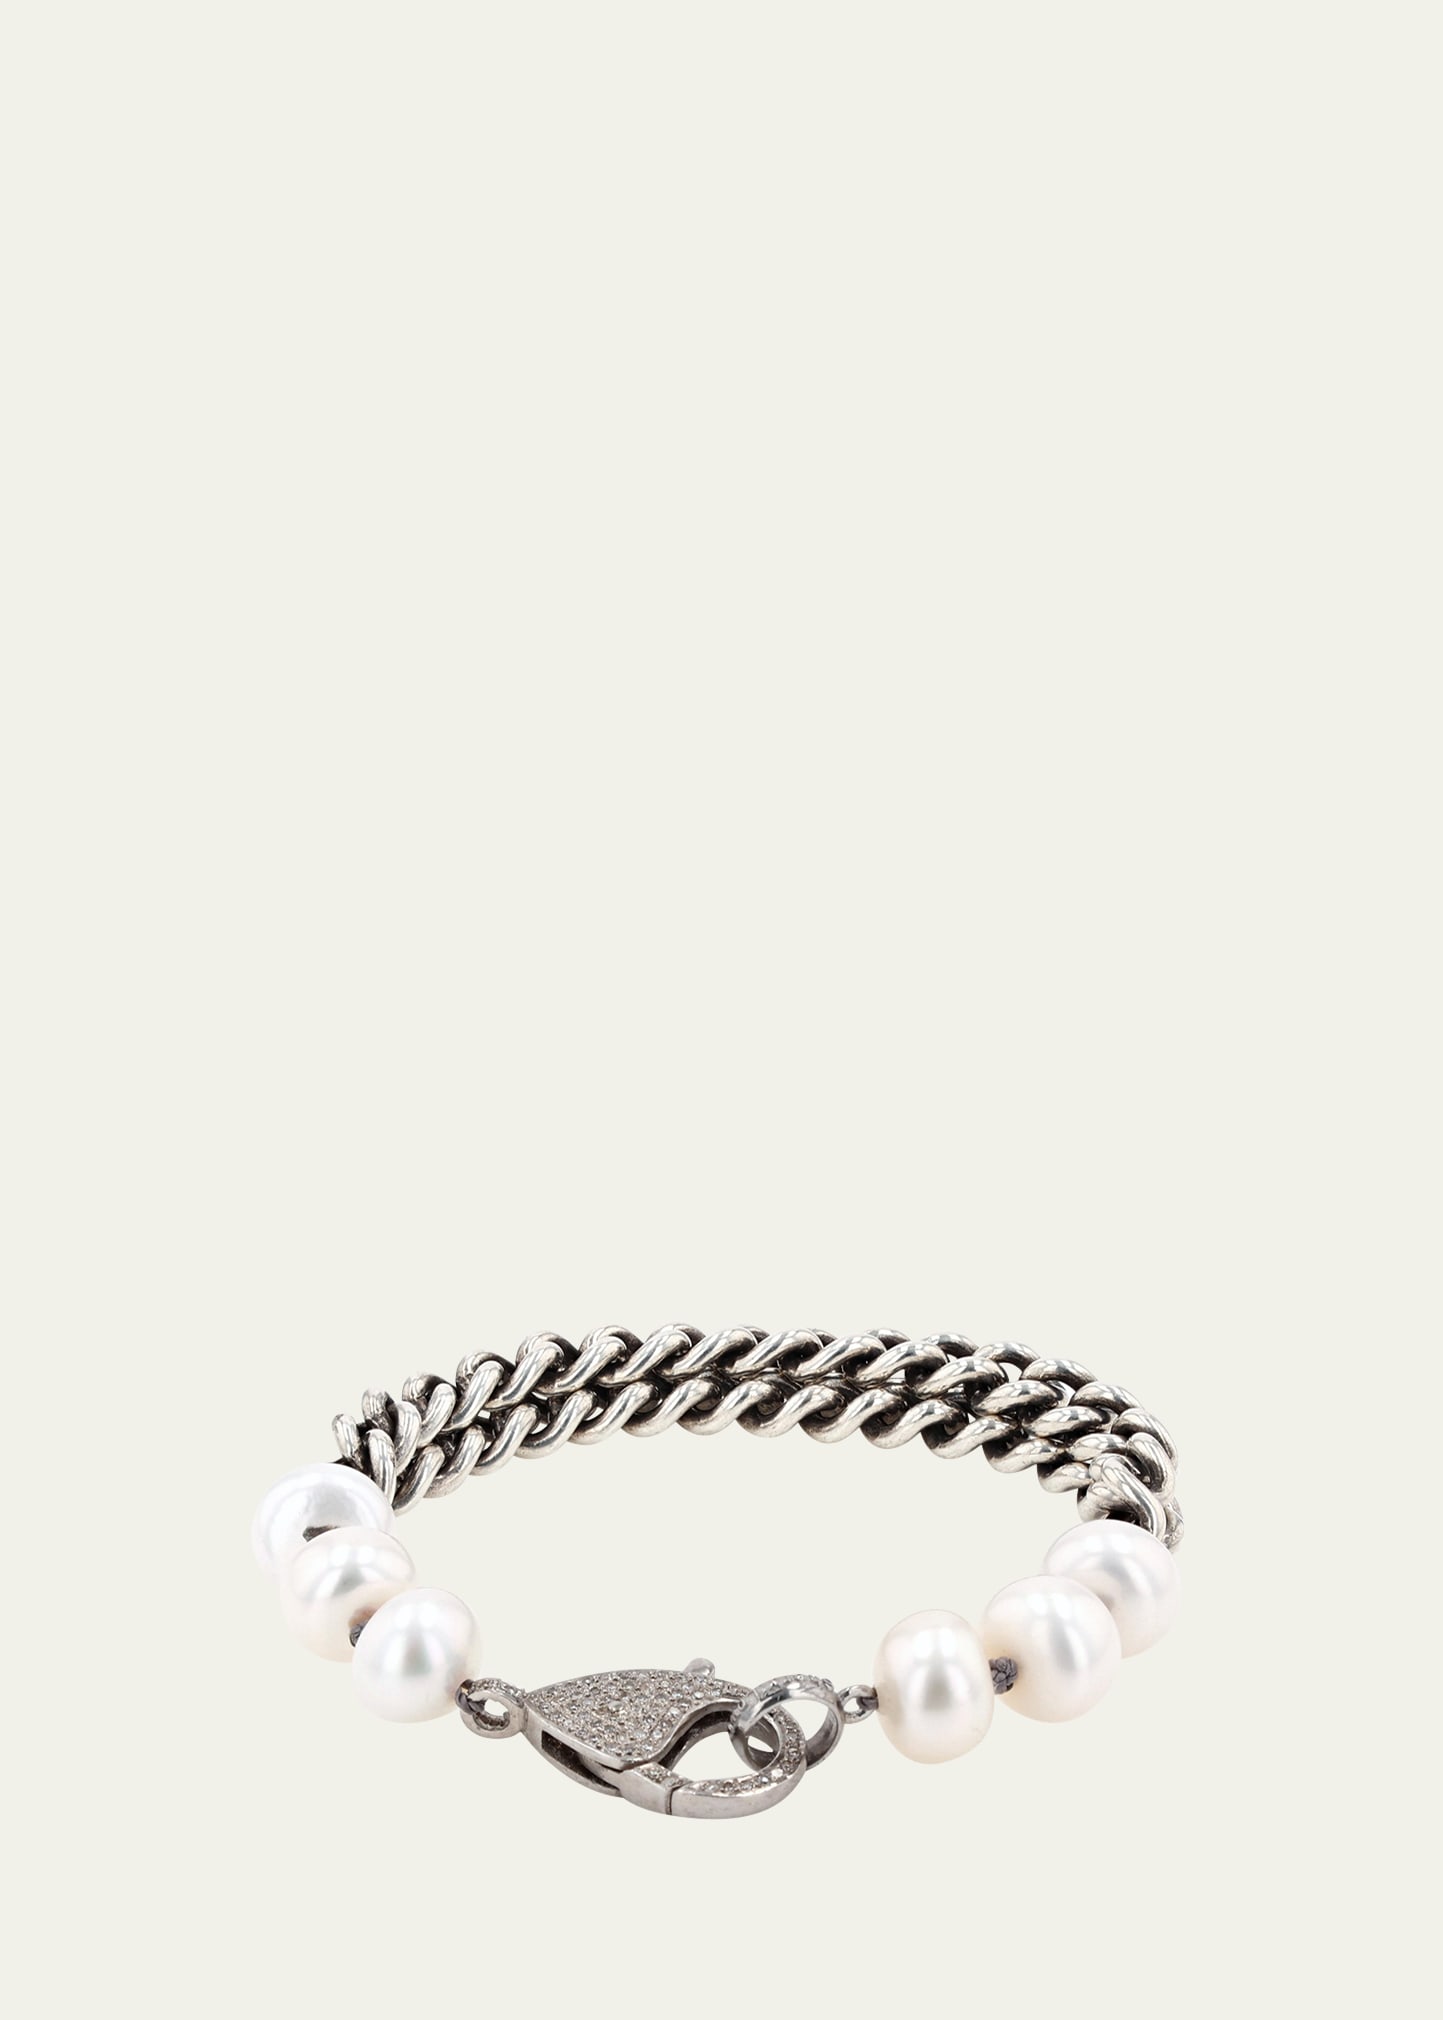 Pearl and Double Chain Bracelet with Pave Diamond Clasp